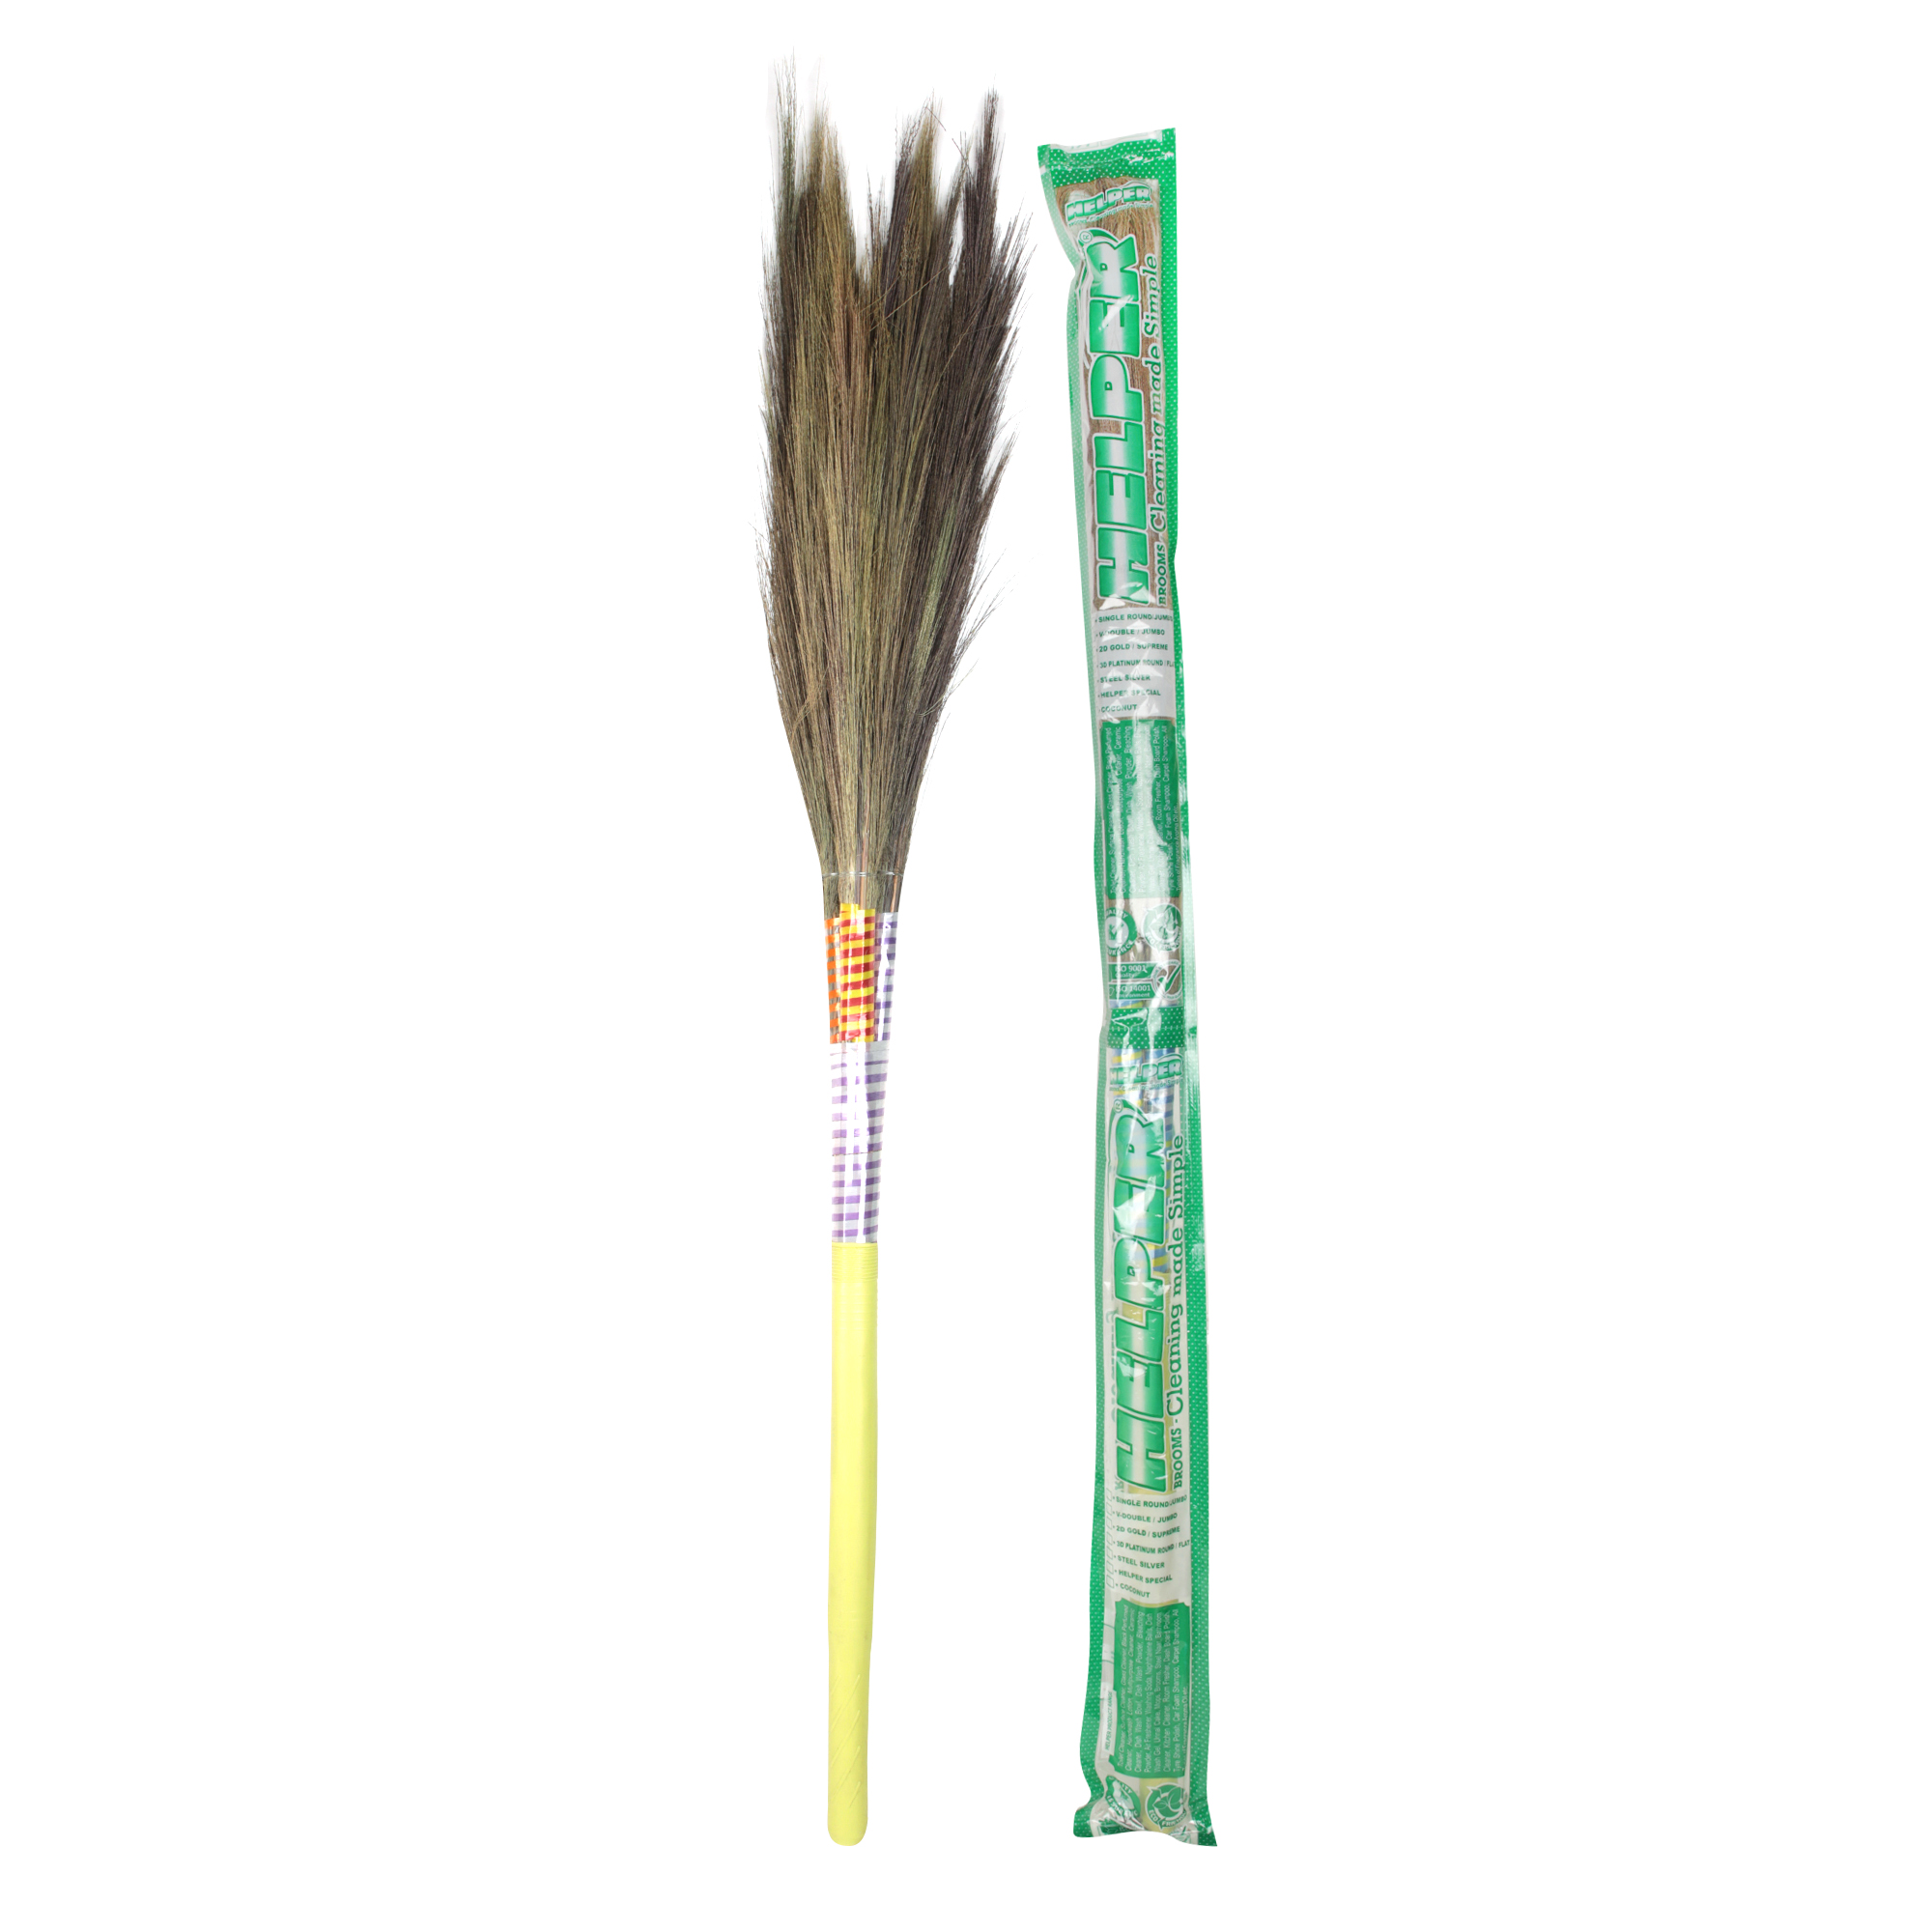 Helper Broom 3D Platinum Round With Lace, 1Pc Pack